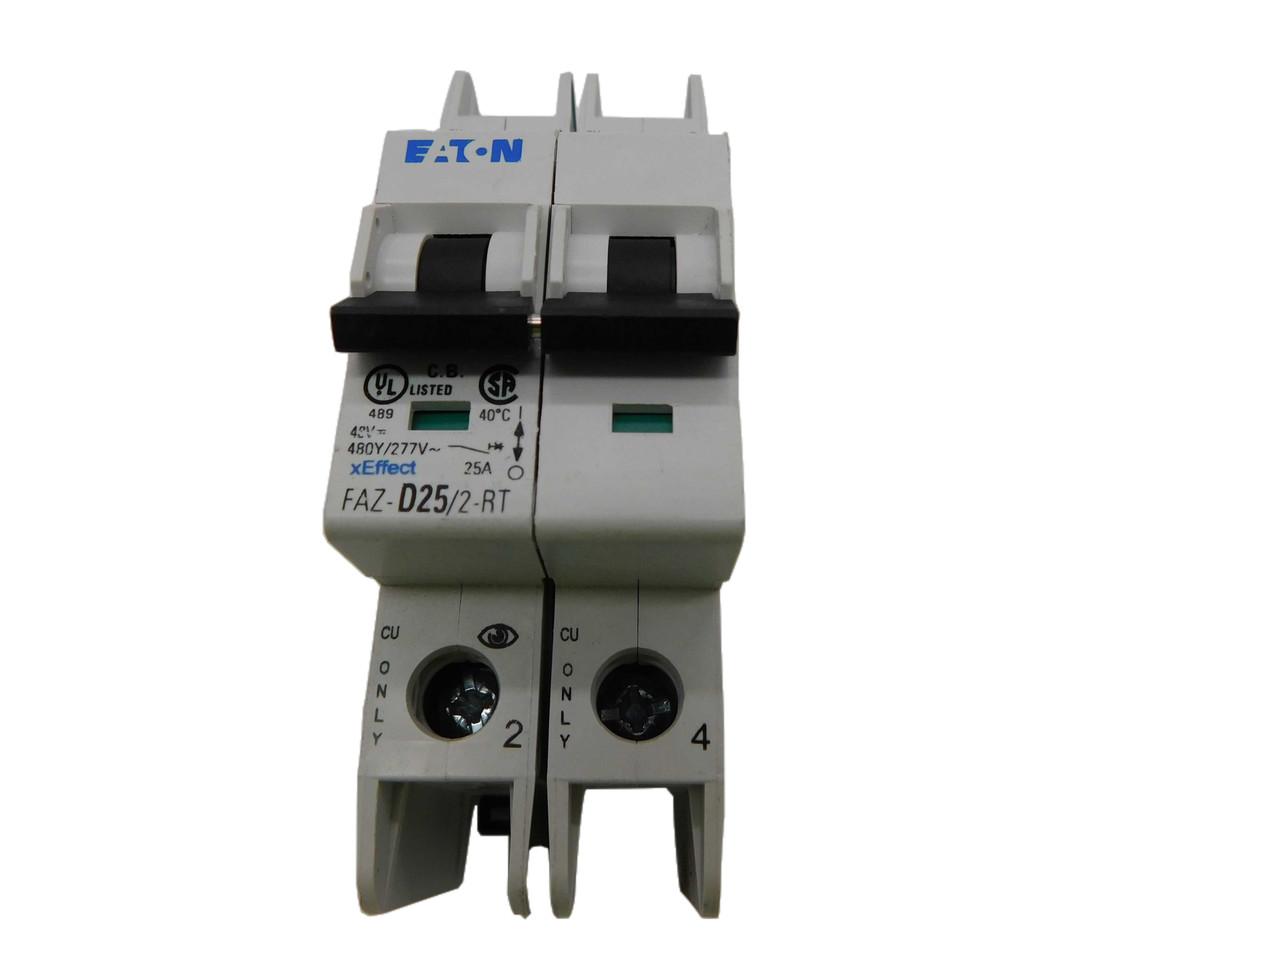 Eaton FAZ-D25/2-RT 277/480 VAC 50/60 Hz, 25 A, 2-Pole, 10/14 kA, 10 to 20 x Rated Current, Ring Tongue Terminal, DIN Rail Mount, Standard Packaging, D-Curve, Current Limiting, Thermal Magnetic